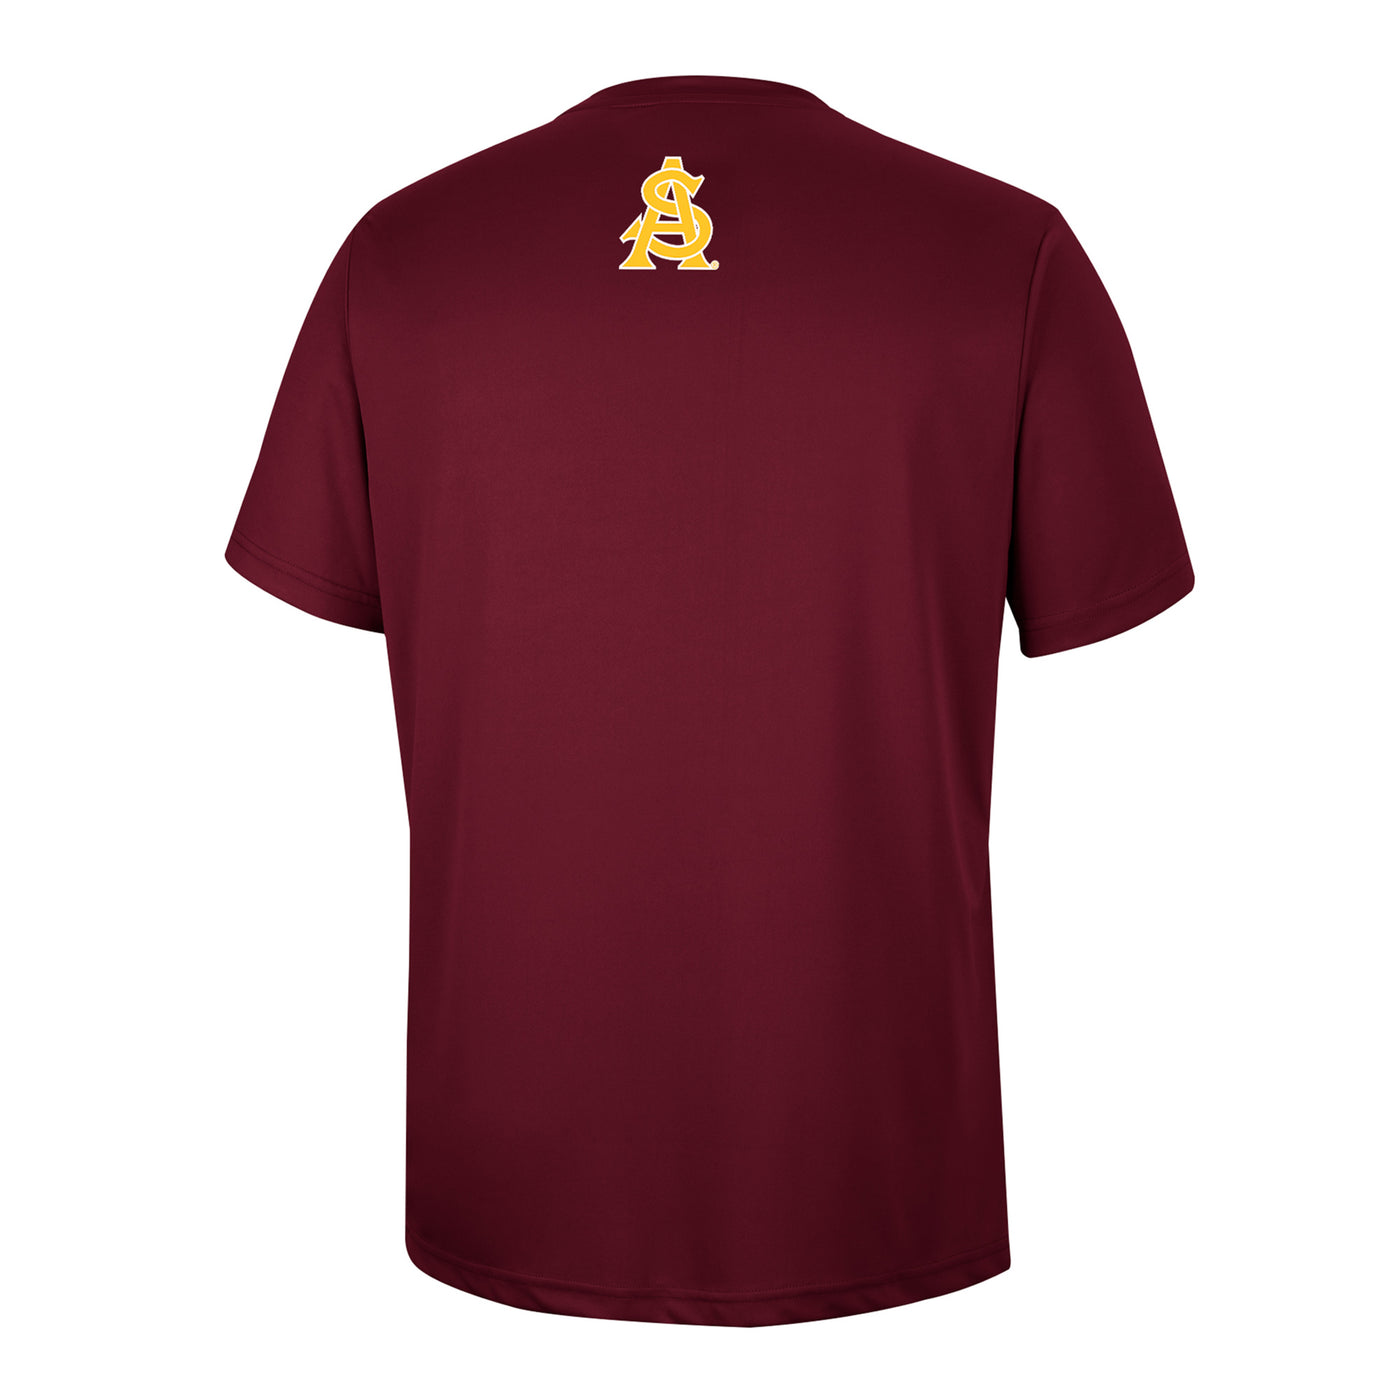 Back view of ASU maroon tee with interlocking 'A' and 'S'